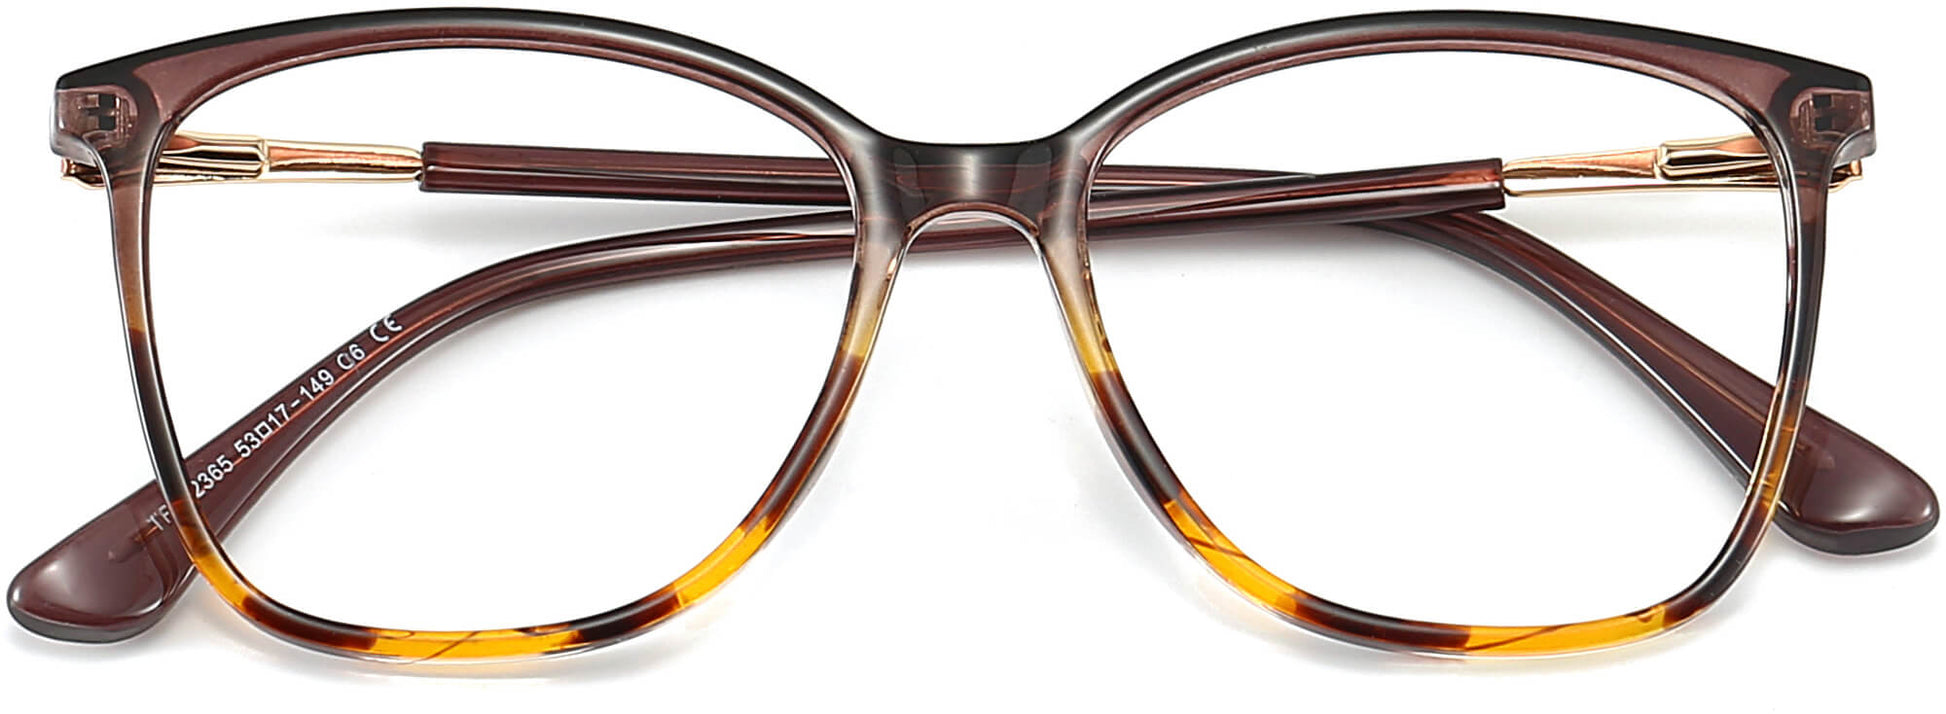 Liana Square Gray Eyeglasses from ANRRI, closed view